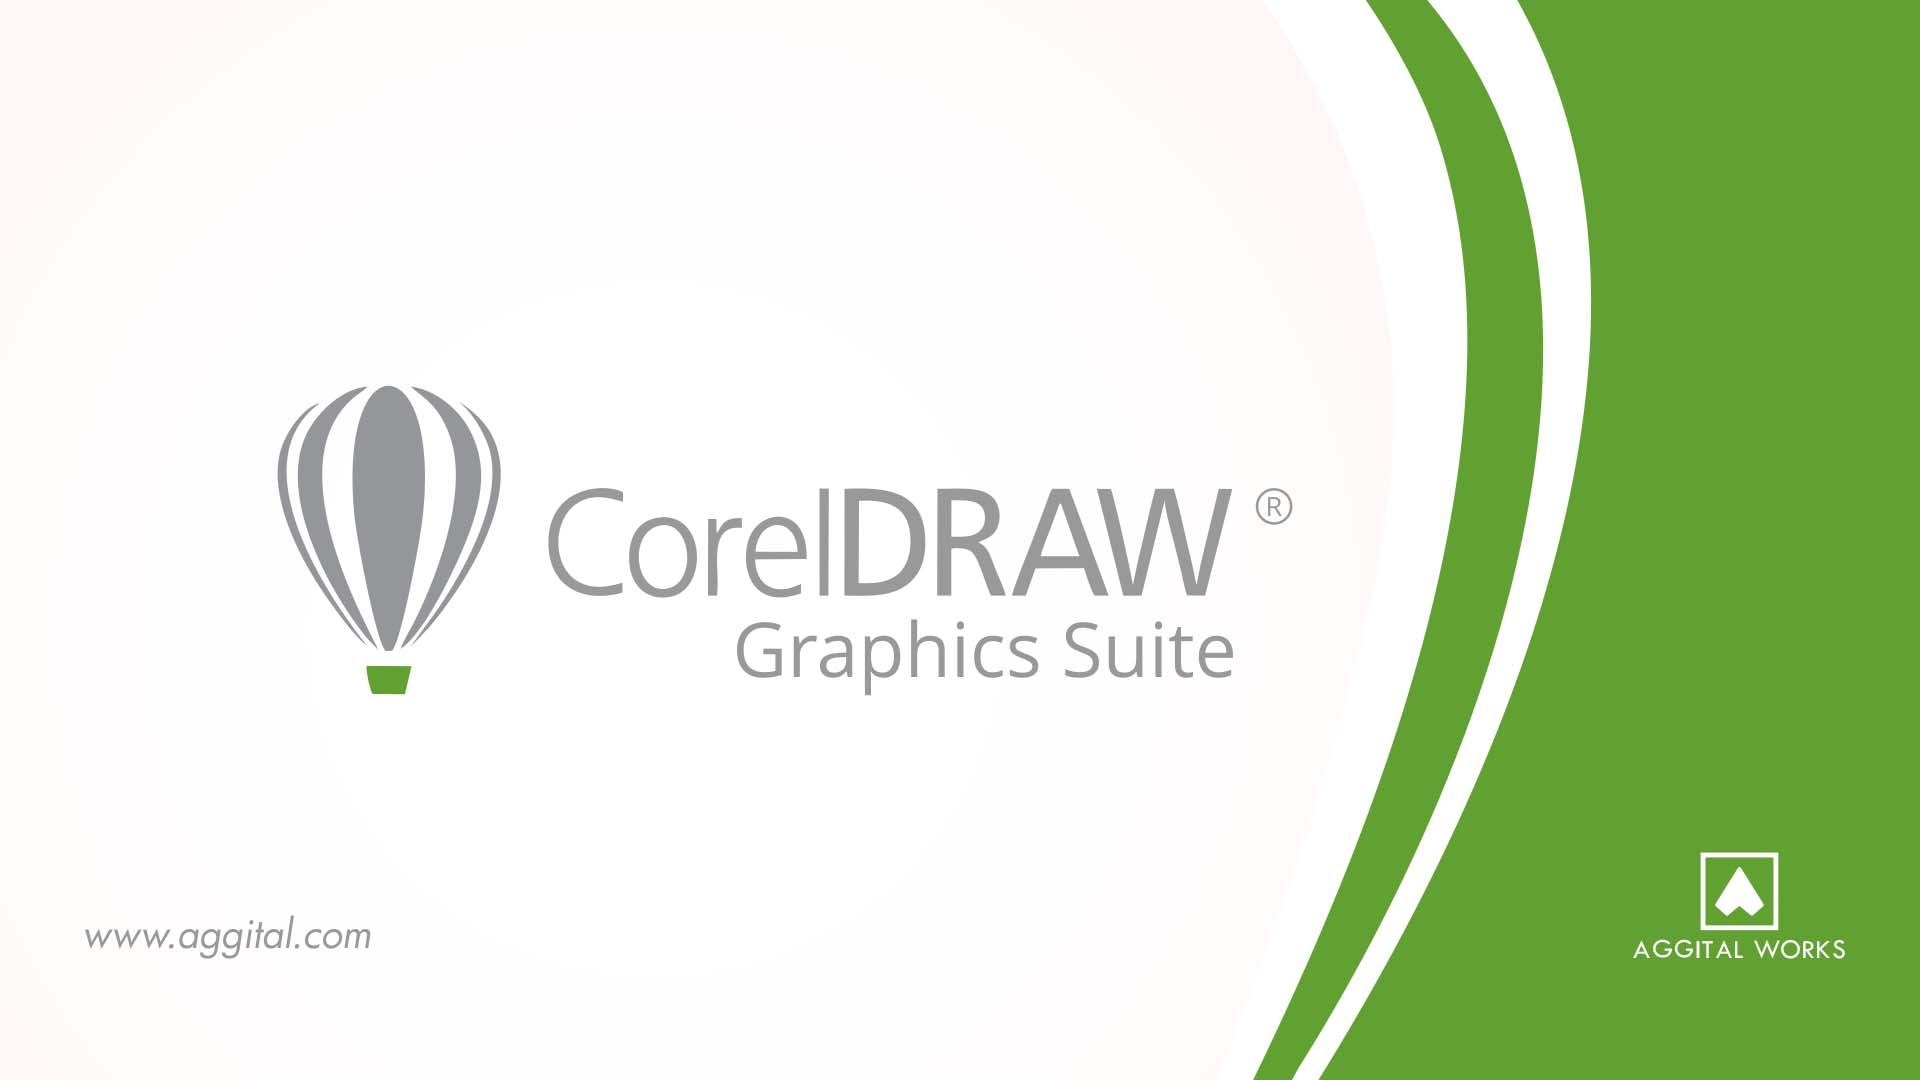 Thinking About Doing Your Own Designs Here's What CorelDraw Can Do!